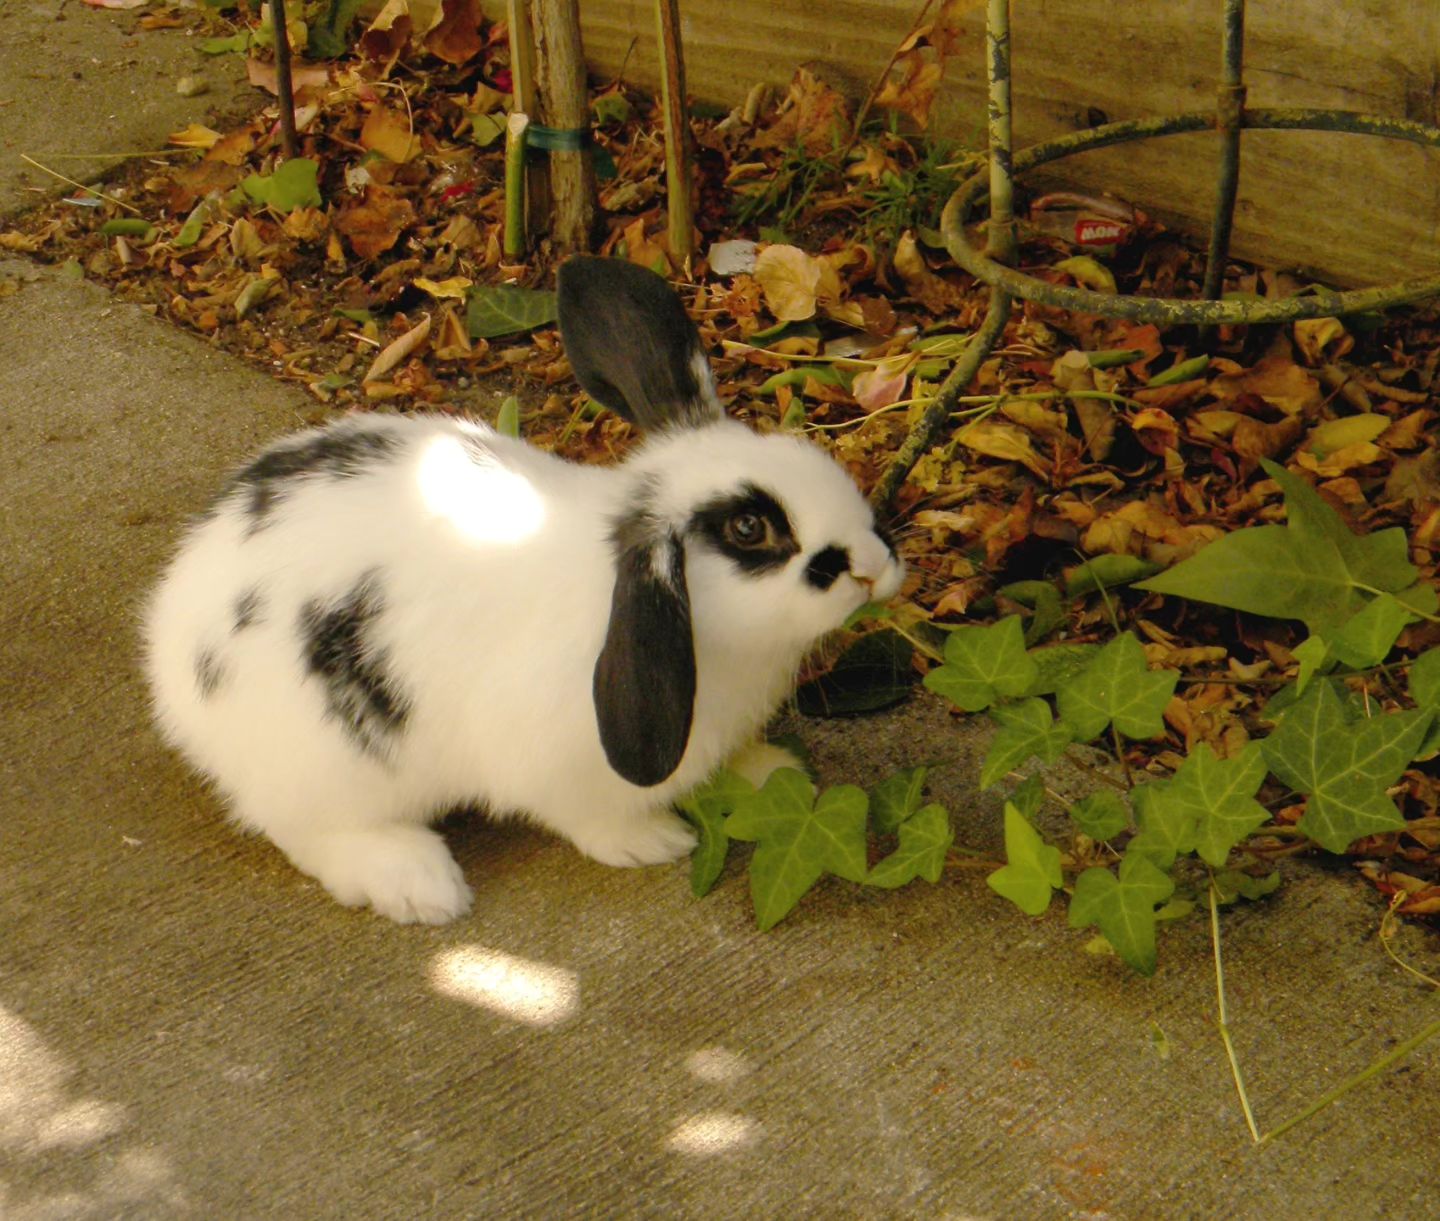 Throwback to Rorschach (Rory) as a baby. Rest in peace, beautiful. You were the kindest Bunn I've ever had. 💜🌈